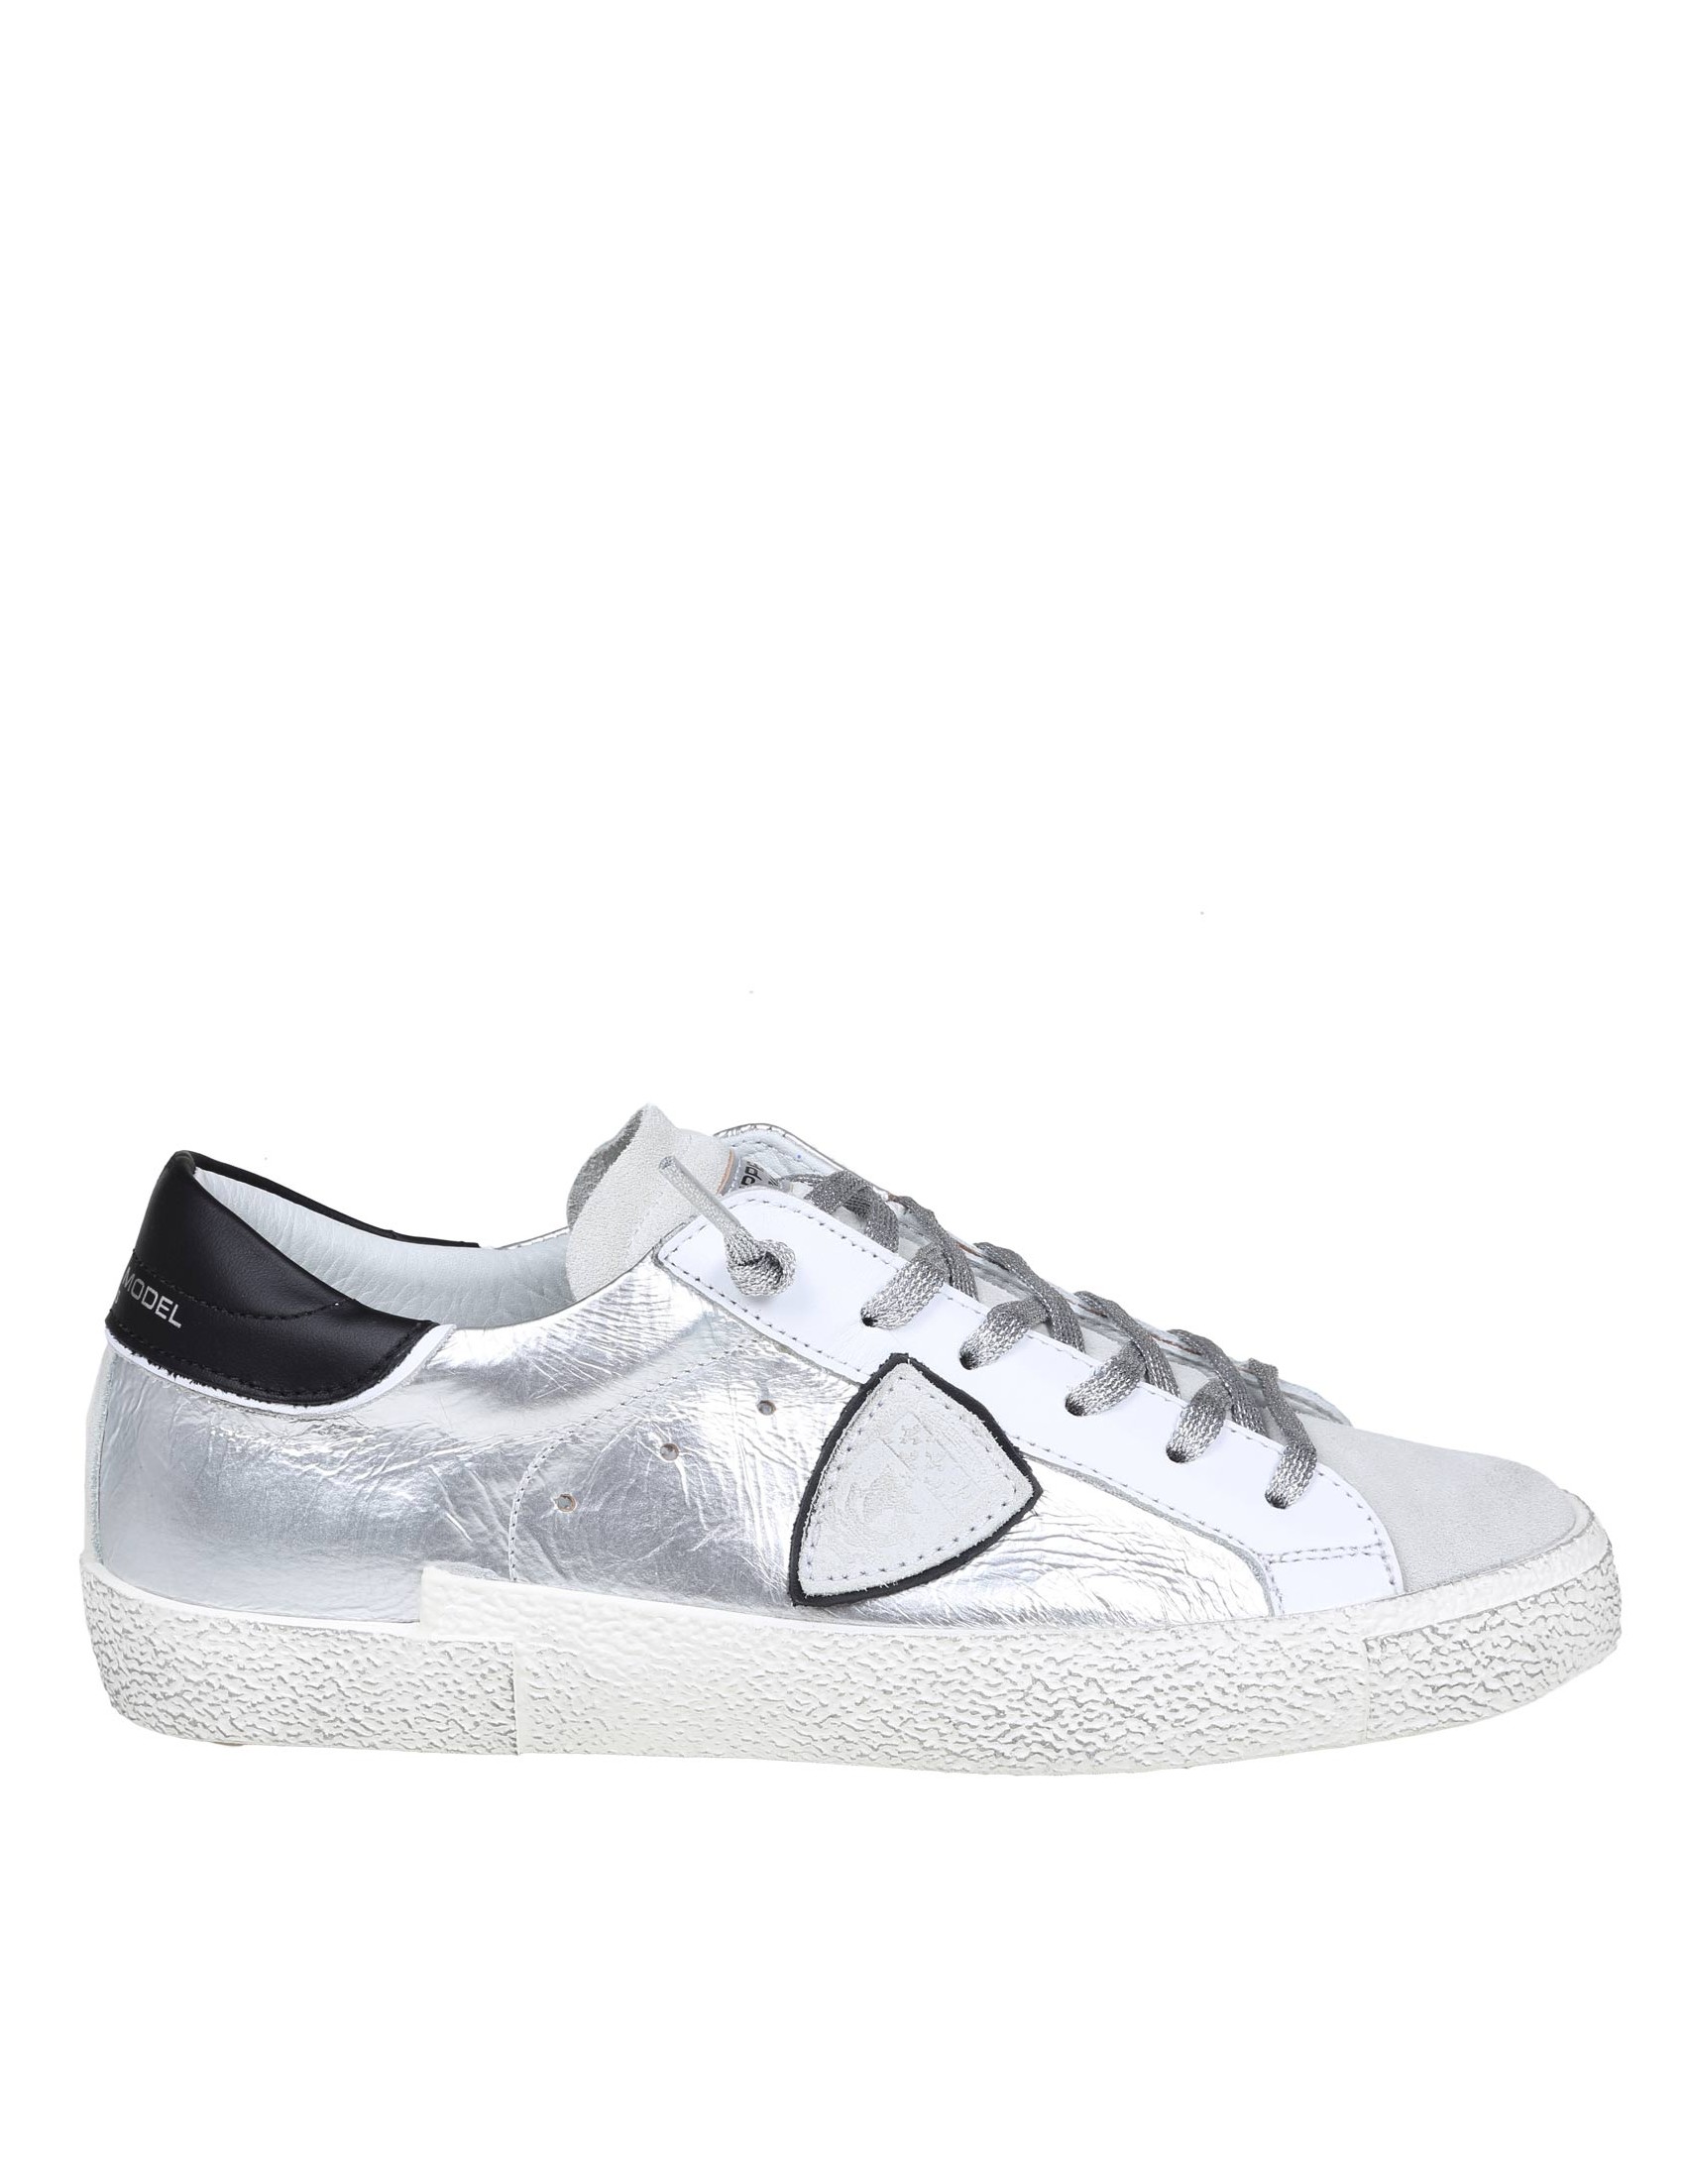 PHILIPPE MODEL PRSX SNEAKERS IN LAMINATED LEATHER